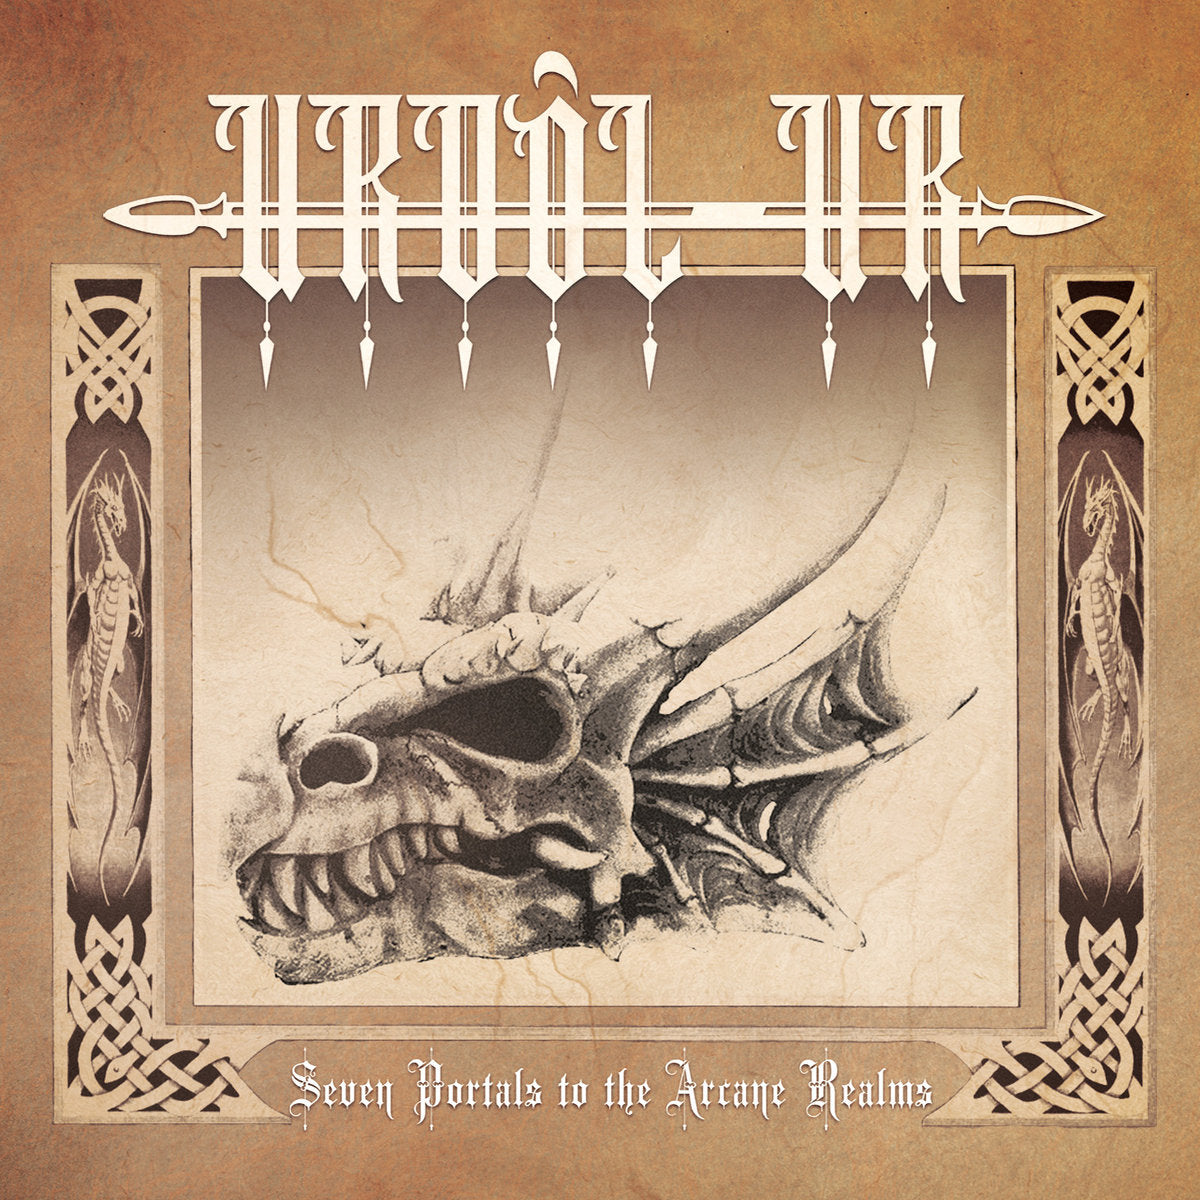 [SOLD OUT] URDÔL UR "Seven Portals to the Arcane Realms" CD [digipak]